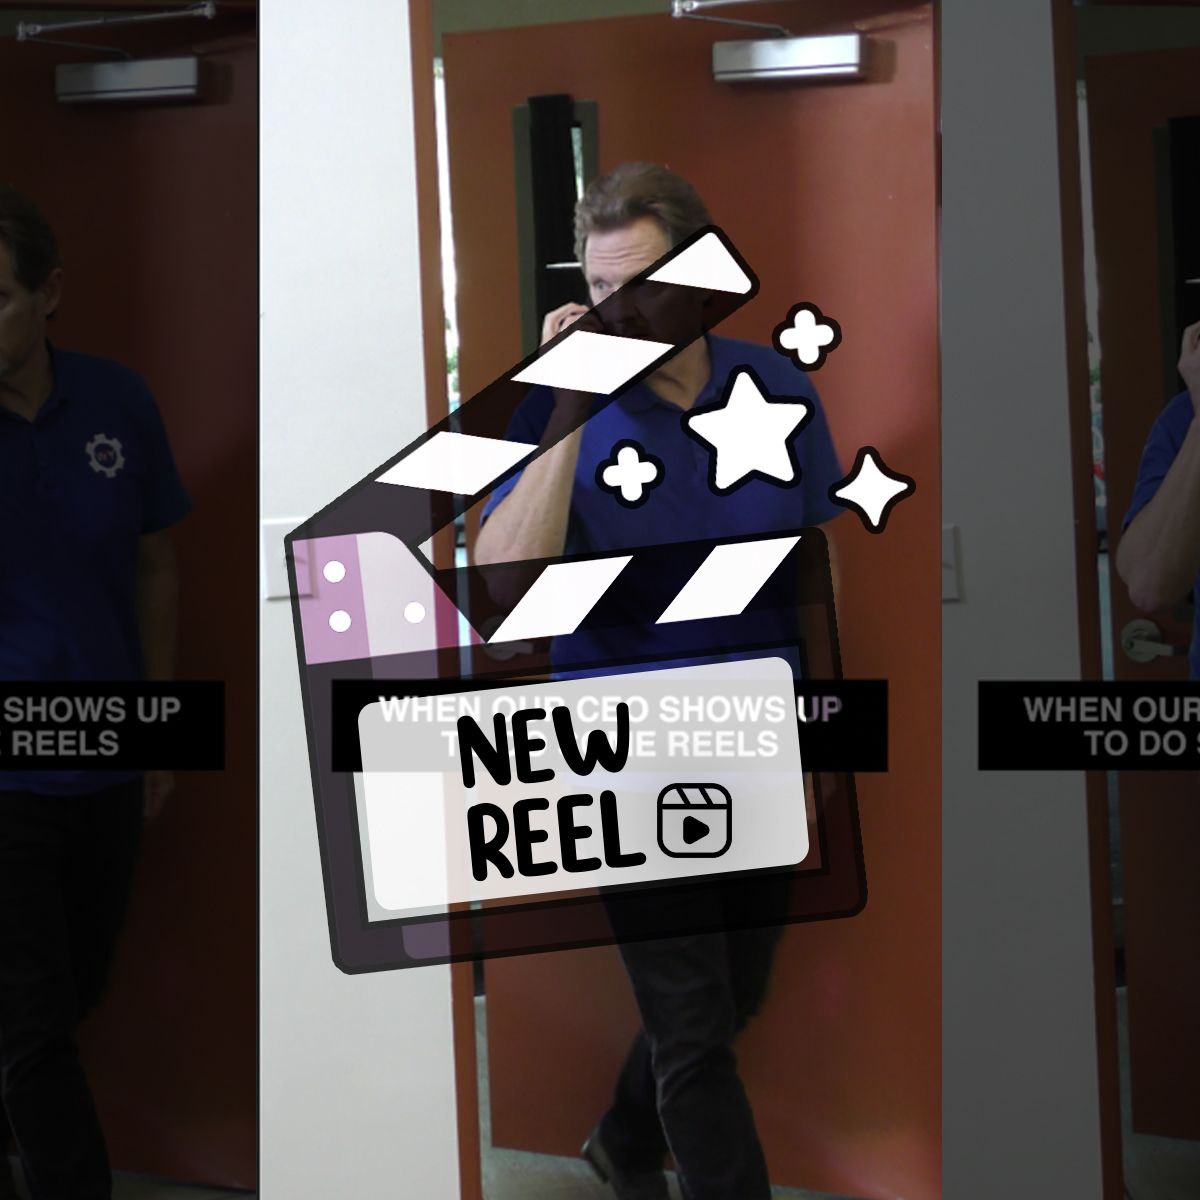 Reel: When our CEO shows up to do some reels